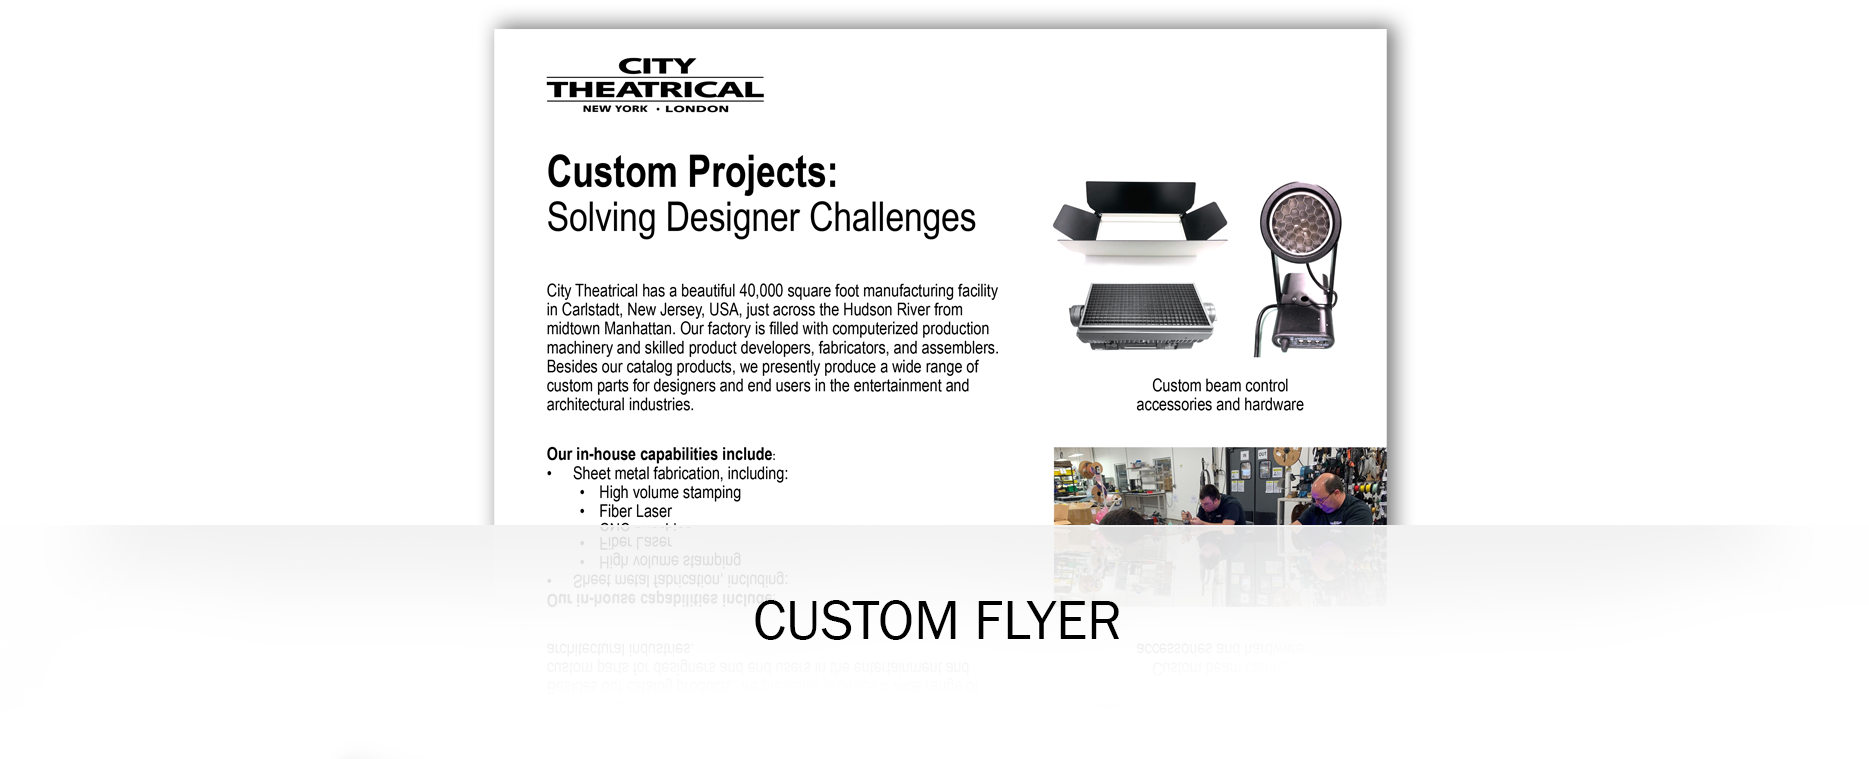 Custom Projects Flyer USA